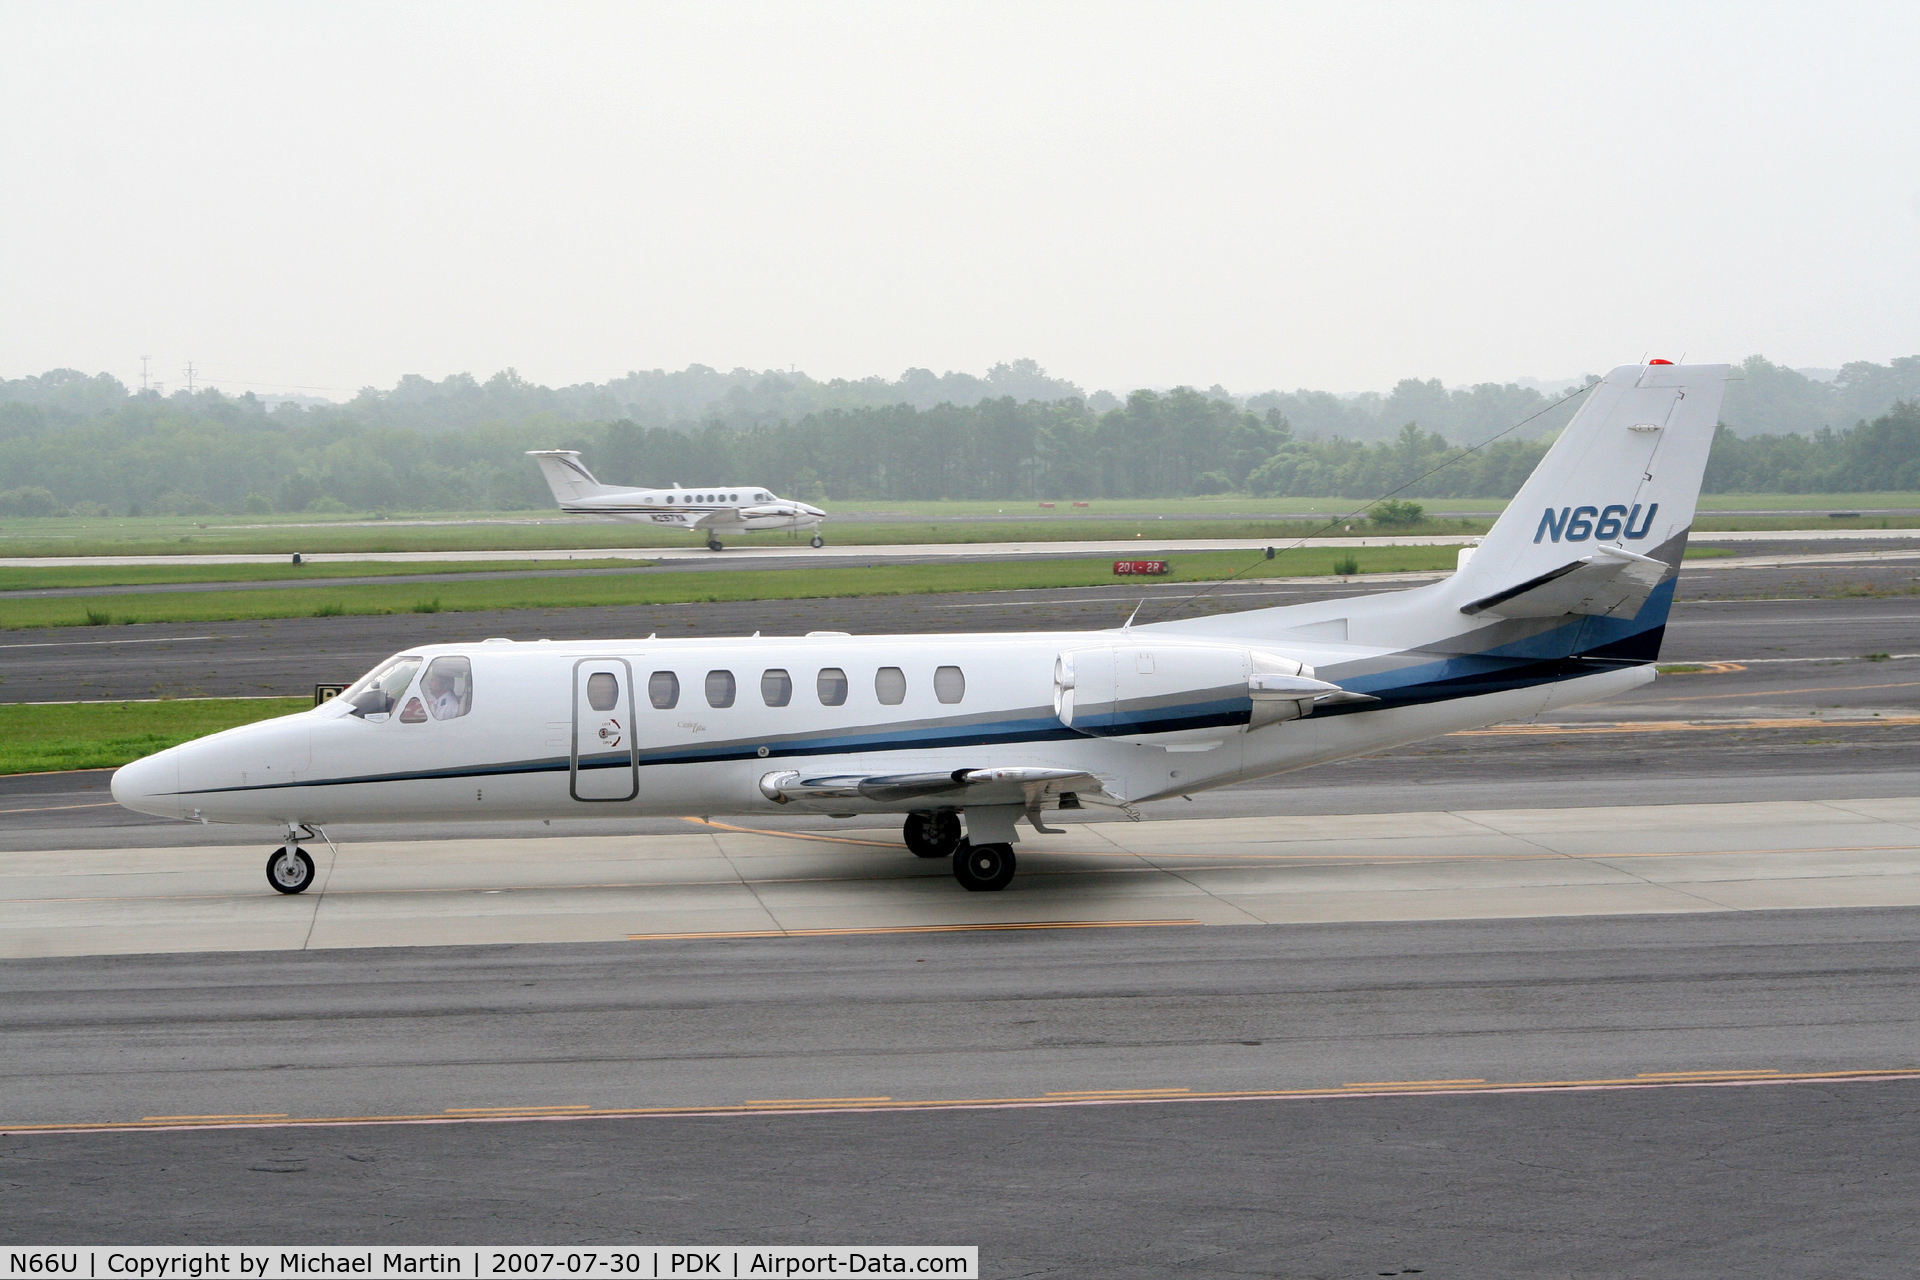 N66U, 1998 Cessna 560 C/N 560-0489, Taxing to Epps Air Service